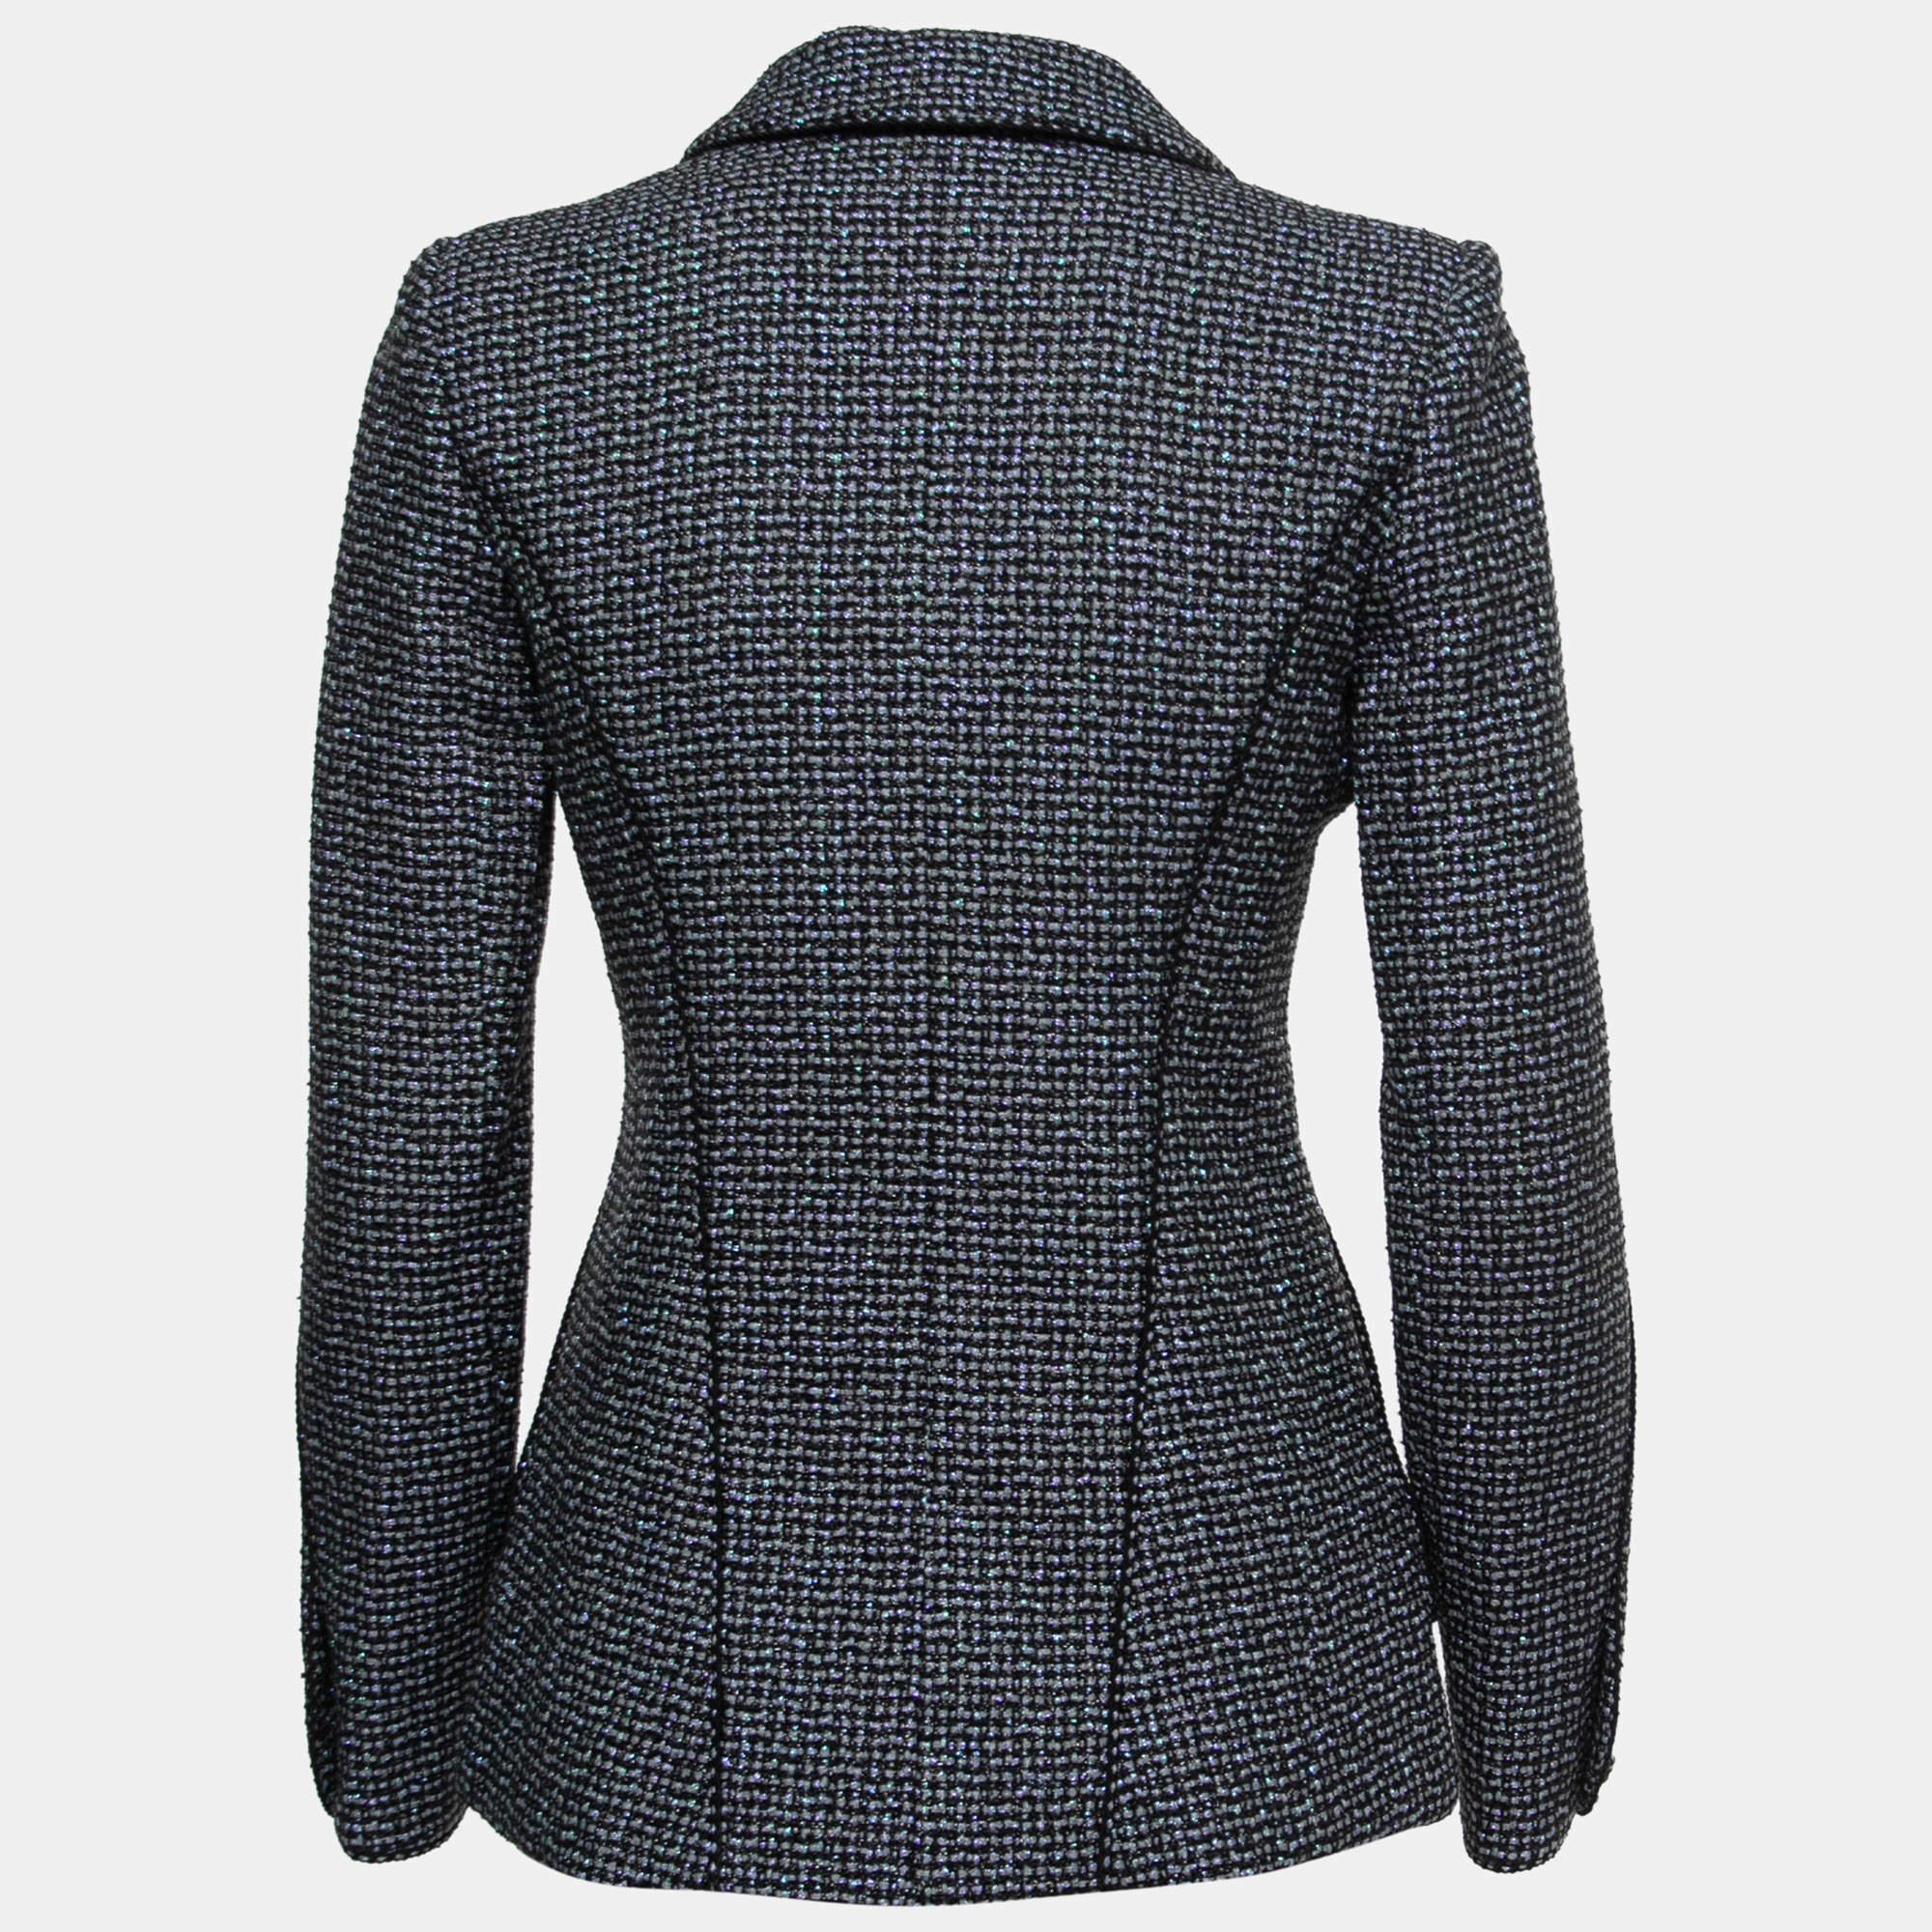 The Chanel tweed jacket exudes timeless elegance. Crafted from luxurious tweed fabric, this tailored jacket features a single-button closure, structured shoulders, and a classic collar. Its impeccable design showcases Chanel's signature